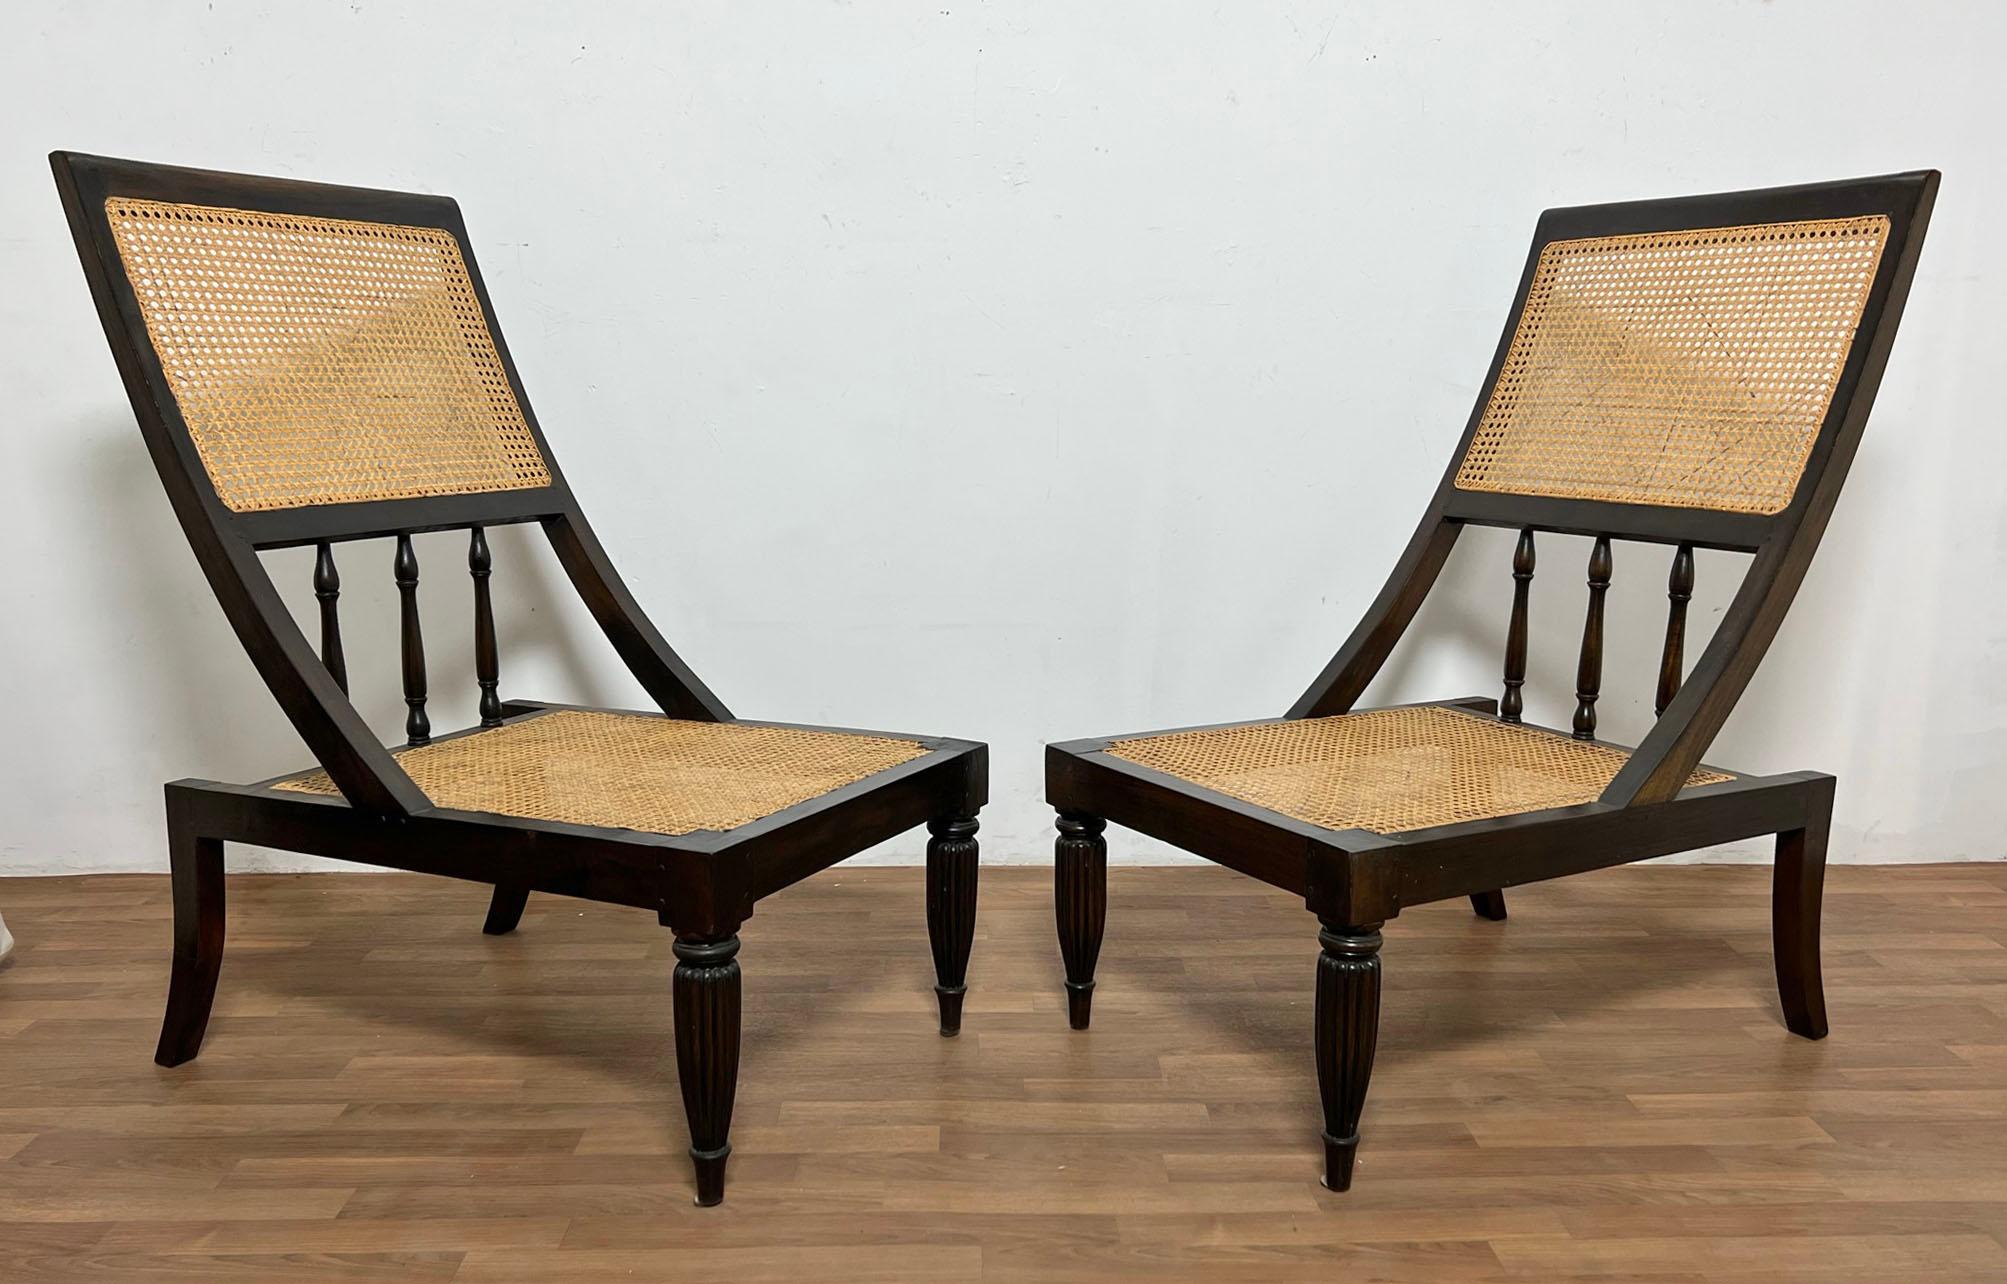 An unusual pair of Anglo-Indian style lounge chairs with gracefully canted backrests and front reeded Klismos legs, with elegant Klismos legs at the rear. We’re partial to an airier look and recommend these displayed with their cane panels